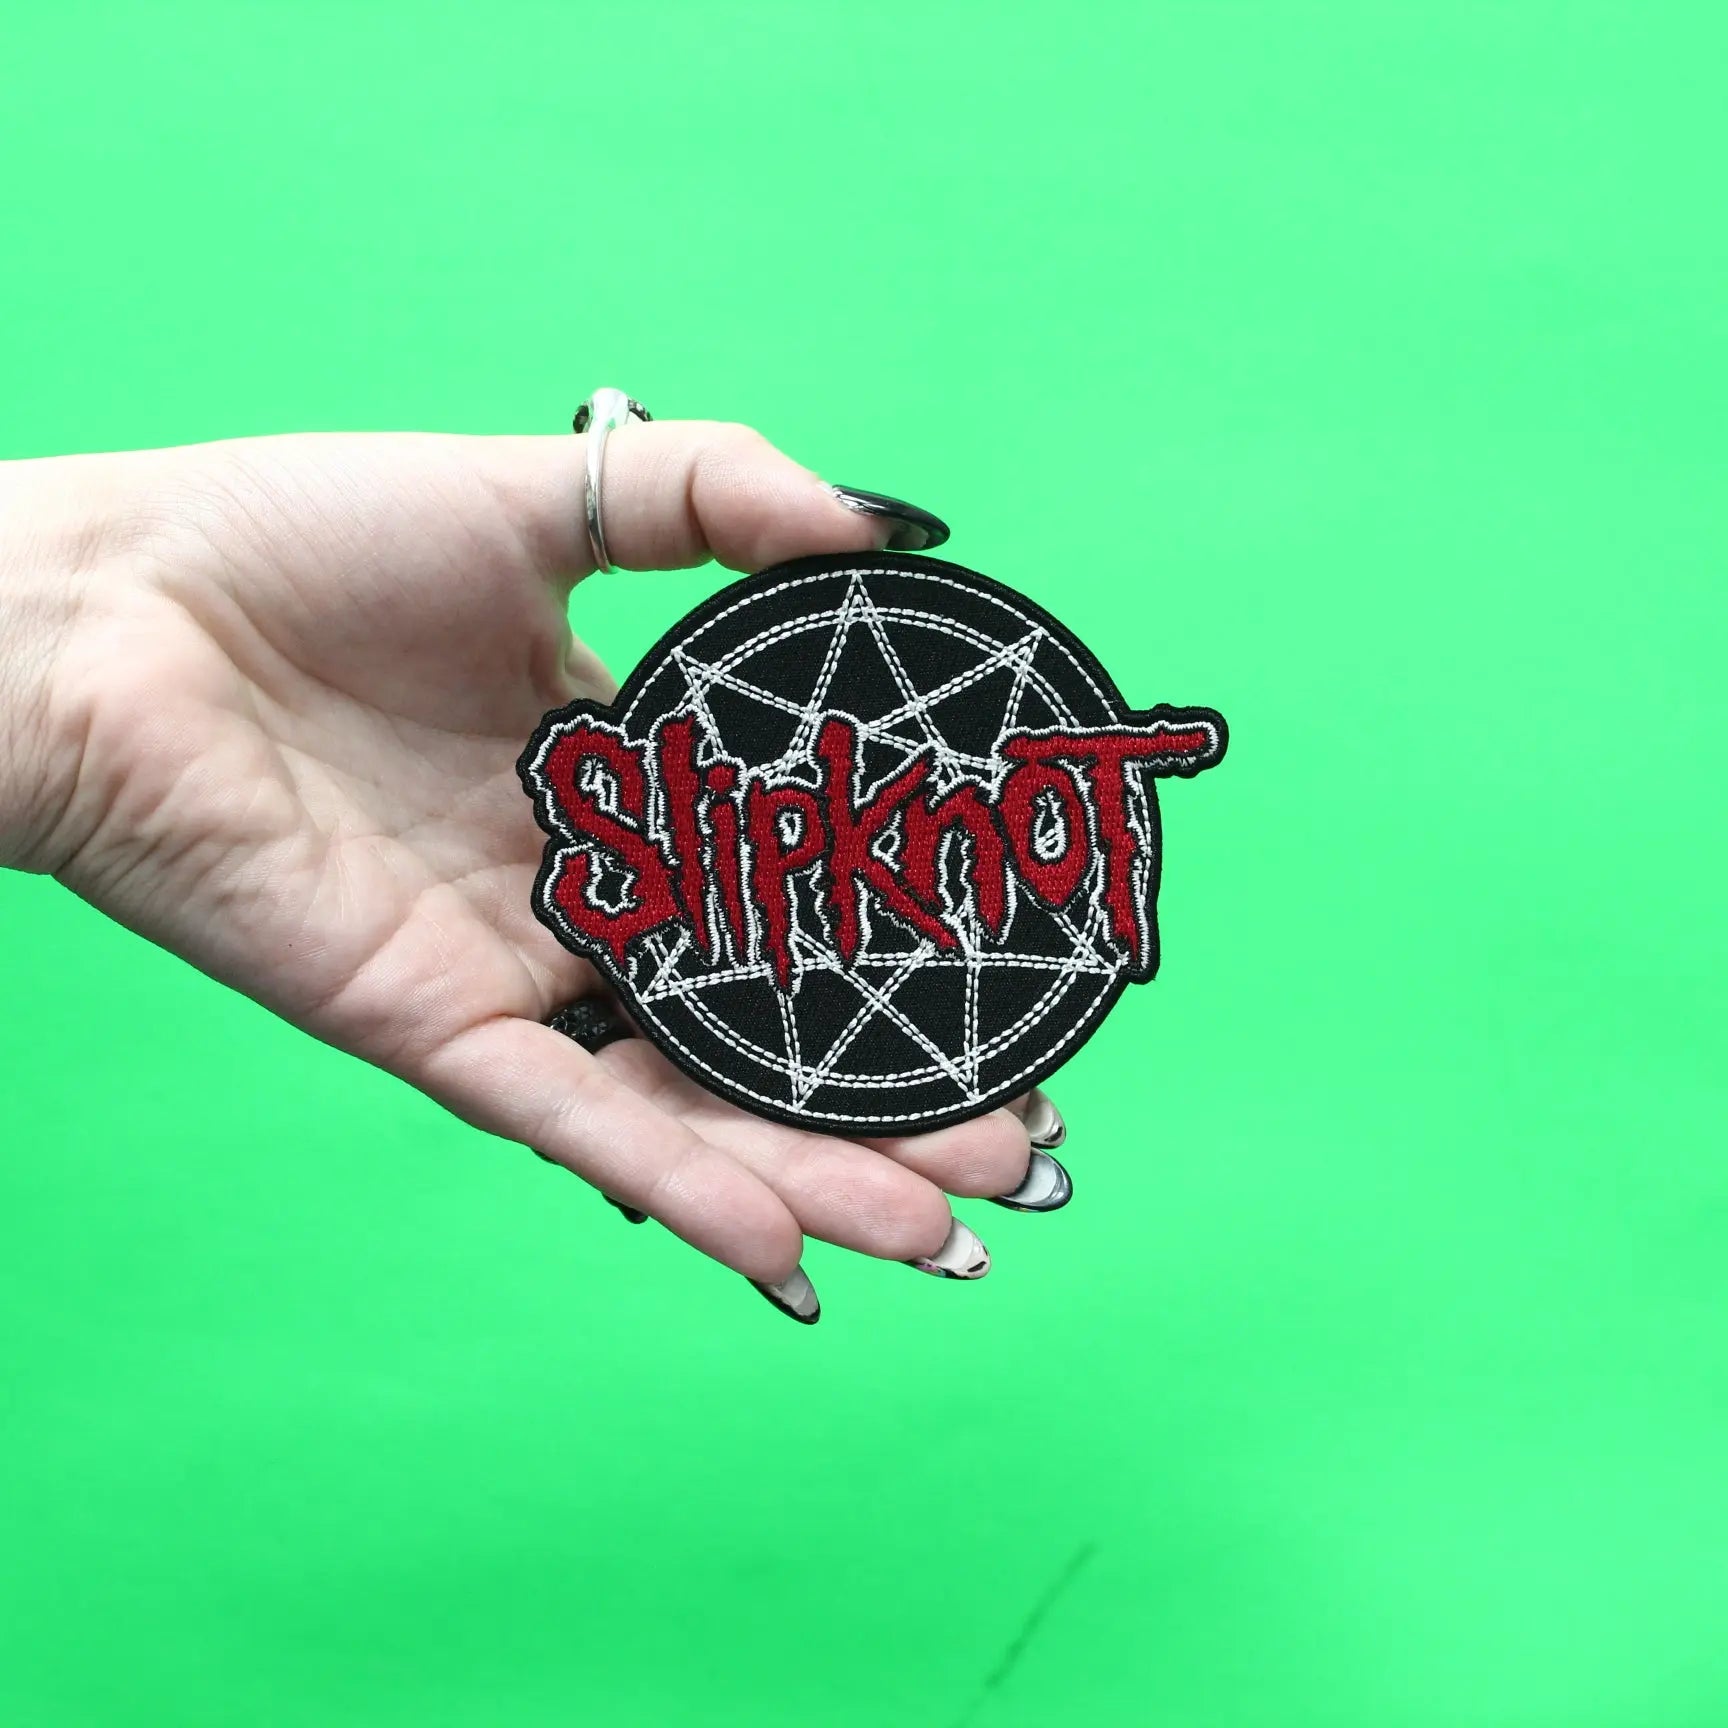 Slipknot Nonogram Logo Patch Mask American Metal Embroidered Iron On